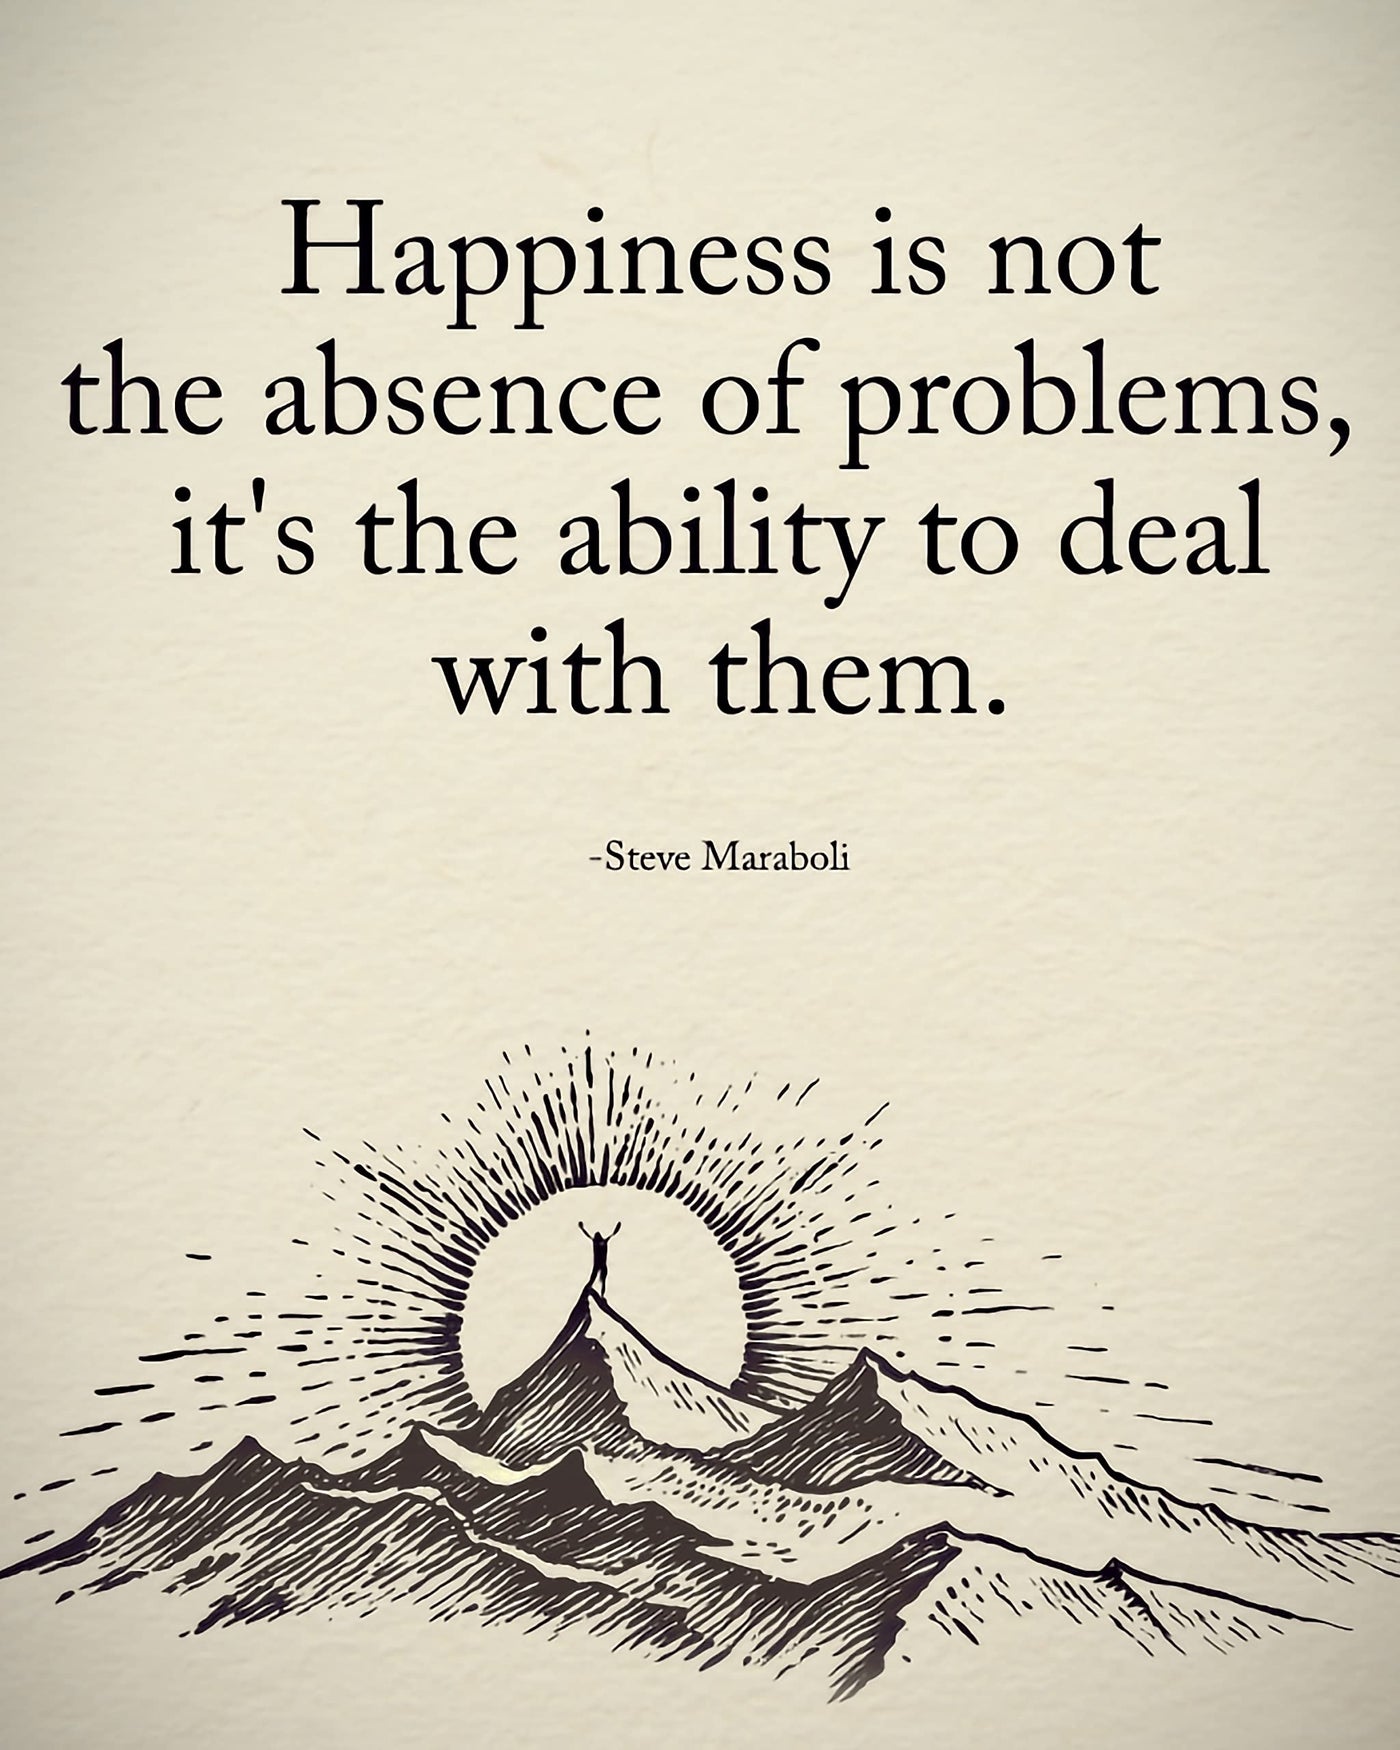 Happiness: Not the Absence of Problems Inspirational Quotes Wall Art Decor -8x10" Replica Mountain Sunset Drawing Print -Ready to Frame. Motivational Home-Office-Classroom Decor. Great Life Lesson!